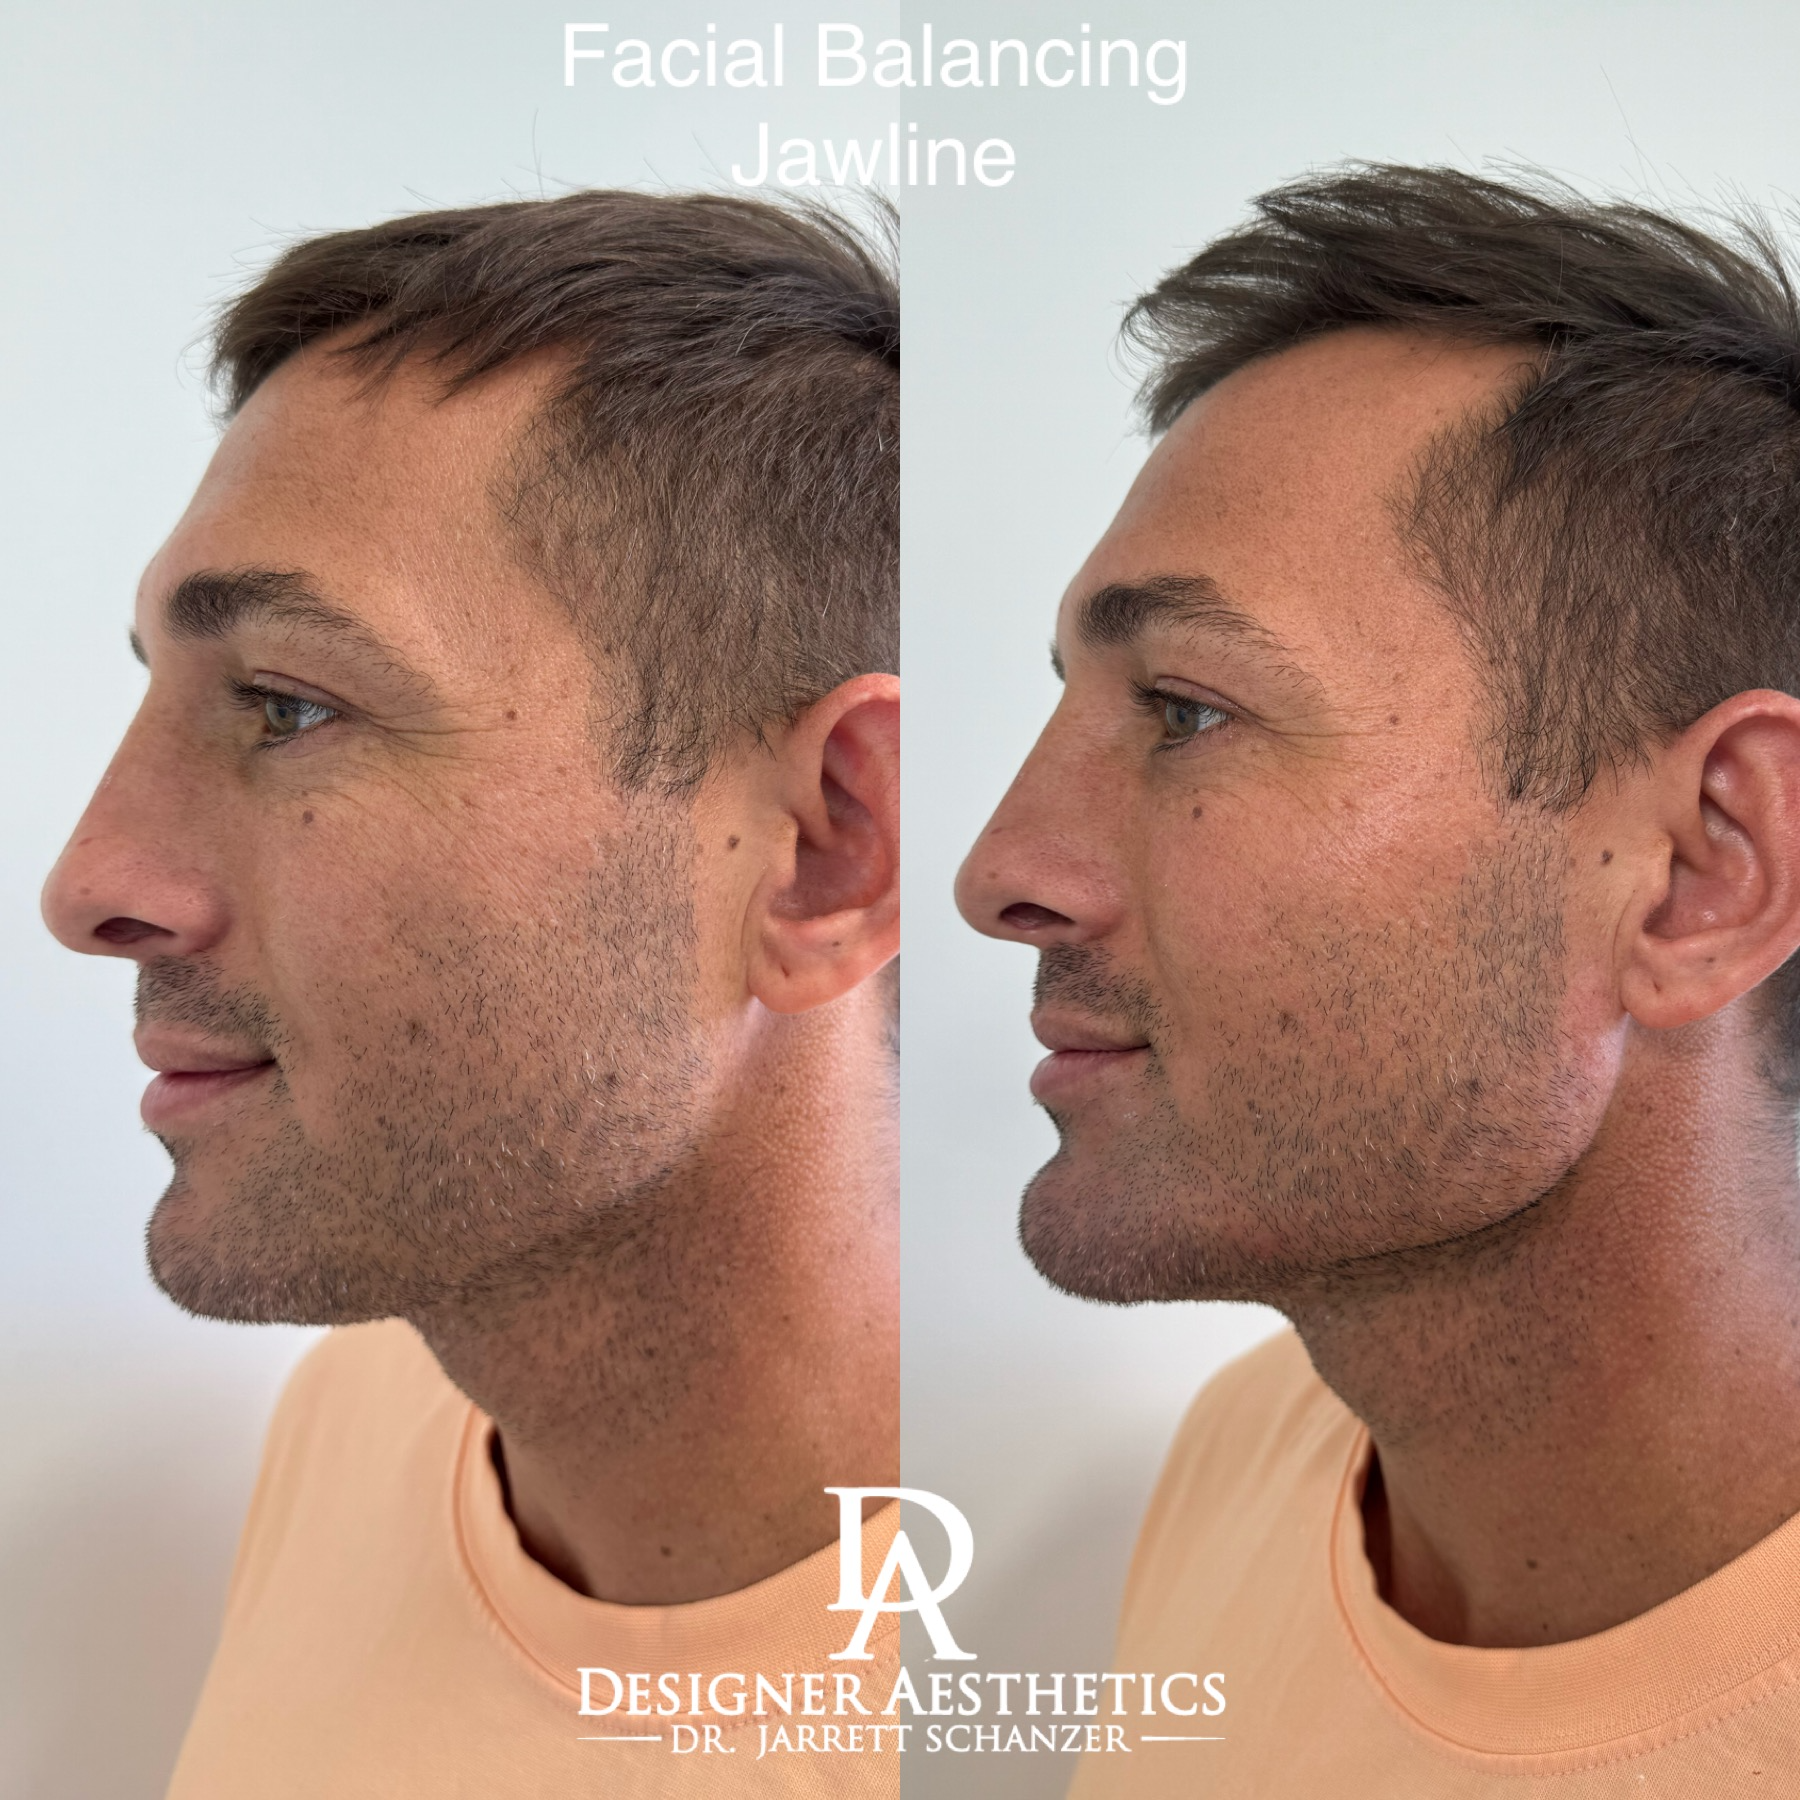 facial balancing doctor jarrett miami new york med spa doctor jarrett schanzer dr jarrett schanzer injector injecting top 100 injectors americas best fillers botox threads perfection facial balancing beauty jawline perfect